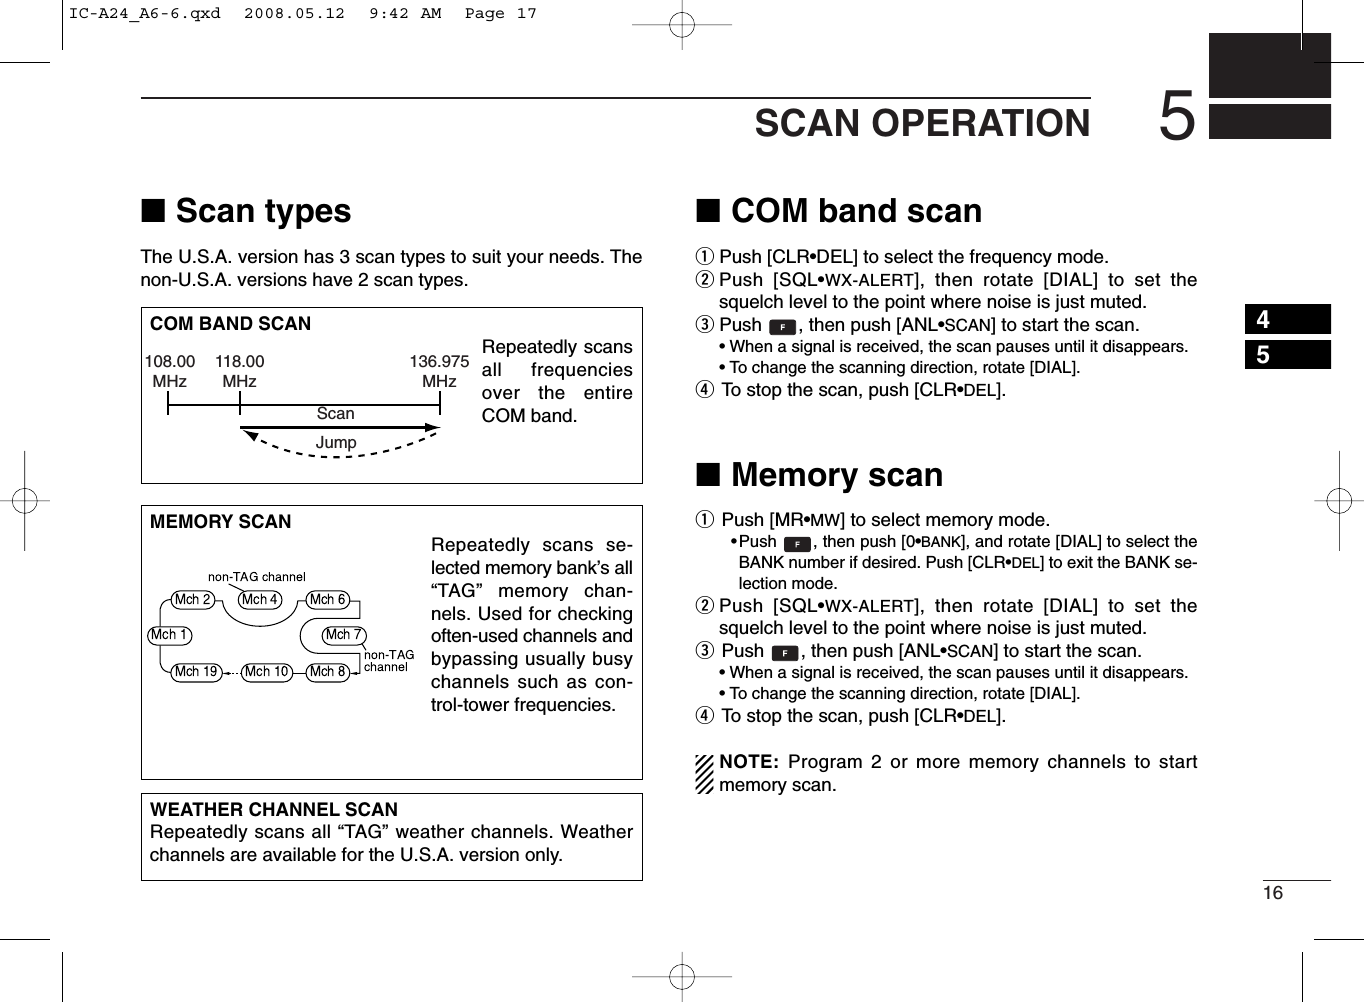 165SCAN OPERATION■Scan typesThe U.S.A. version has 3 scan types to suit your needs. Thenon-U.S.A. versions have 2 scan types.■COM band scanqPush [CLR•DEL] to select the frequency mode.wPush [SQL•WX-ALERT], then rotate [DIAL] to set thesquelch level to the point where noise is just muted.ePush  , then push [ANL•SCAN] to start the scan.• When a signal is received, the scan pauses until it disappears.•To change the scanning direction, rotate [DIAL].rTo stop the scan, push [CLR•DEL].■Memory scanqPush [MR•MW] to select memory mode.•Push  , then push [0•BANK], and rotate [DIAL] to select theBANK number if desired. Push [CLR•DEL] to exit the BANK se-lection mode.wPush [SQL•WX-ALERT], then rotate [DIAL] to set thesquelch level to the point where noise is just muted.ePush  , then push [ANL•SCAN] to start the scan.• When a signal is received, the scan pauses until it disappears.•To change the scanning direction, rotate [DIAL].rTo stop the scan, push [CLR•DEL].NOTE: Program 2 or more memory channels to startmemory scan.WEATHER CHANNEL SCANRepeatedly scans all “TAG” weather channels. Weatherchannels are available for the U.S.A. version only.MEMORY SCANRepeatedly scans se-lected memory bank’s all“TAG” memory chan-nels. Used for checkingoften-used channels andbypassing usually busychannels such as con-trol-tower frequencies.COM BAND SCANRepeatedly scansall frequenciesover the entireCOM band.108.00MHzScanJump118.00MHz136.975MHz45IC-A24_A6-6.qxd  2008.05.12  9:42 AM  Page 17